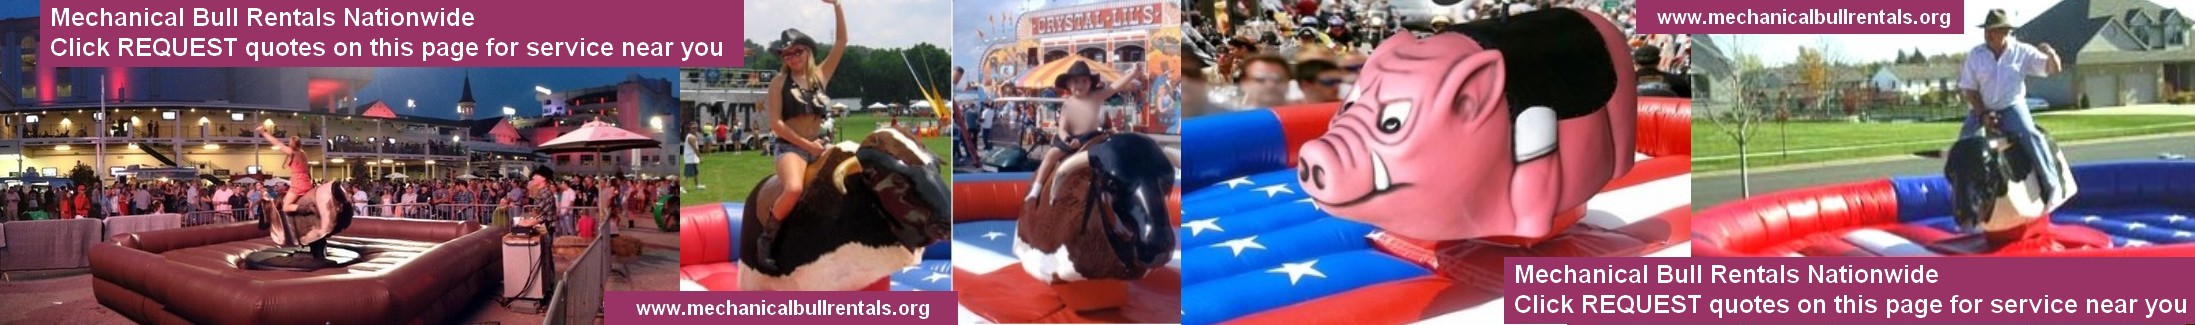 Mechanical Bull Rentals Racine Wisconsin WI and near you. Free referrals to local mechanical bull companies LOGO